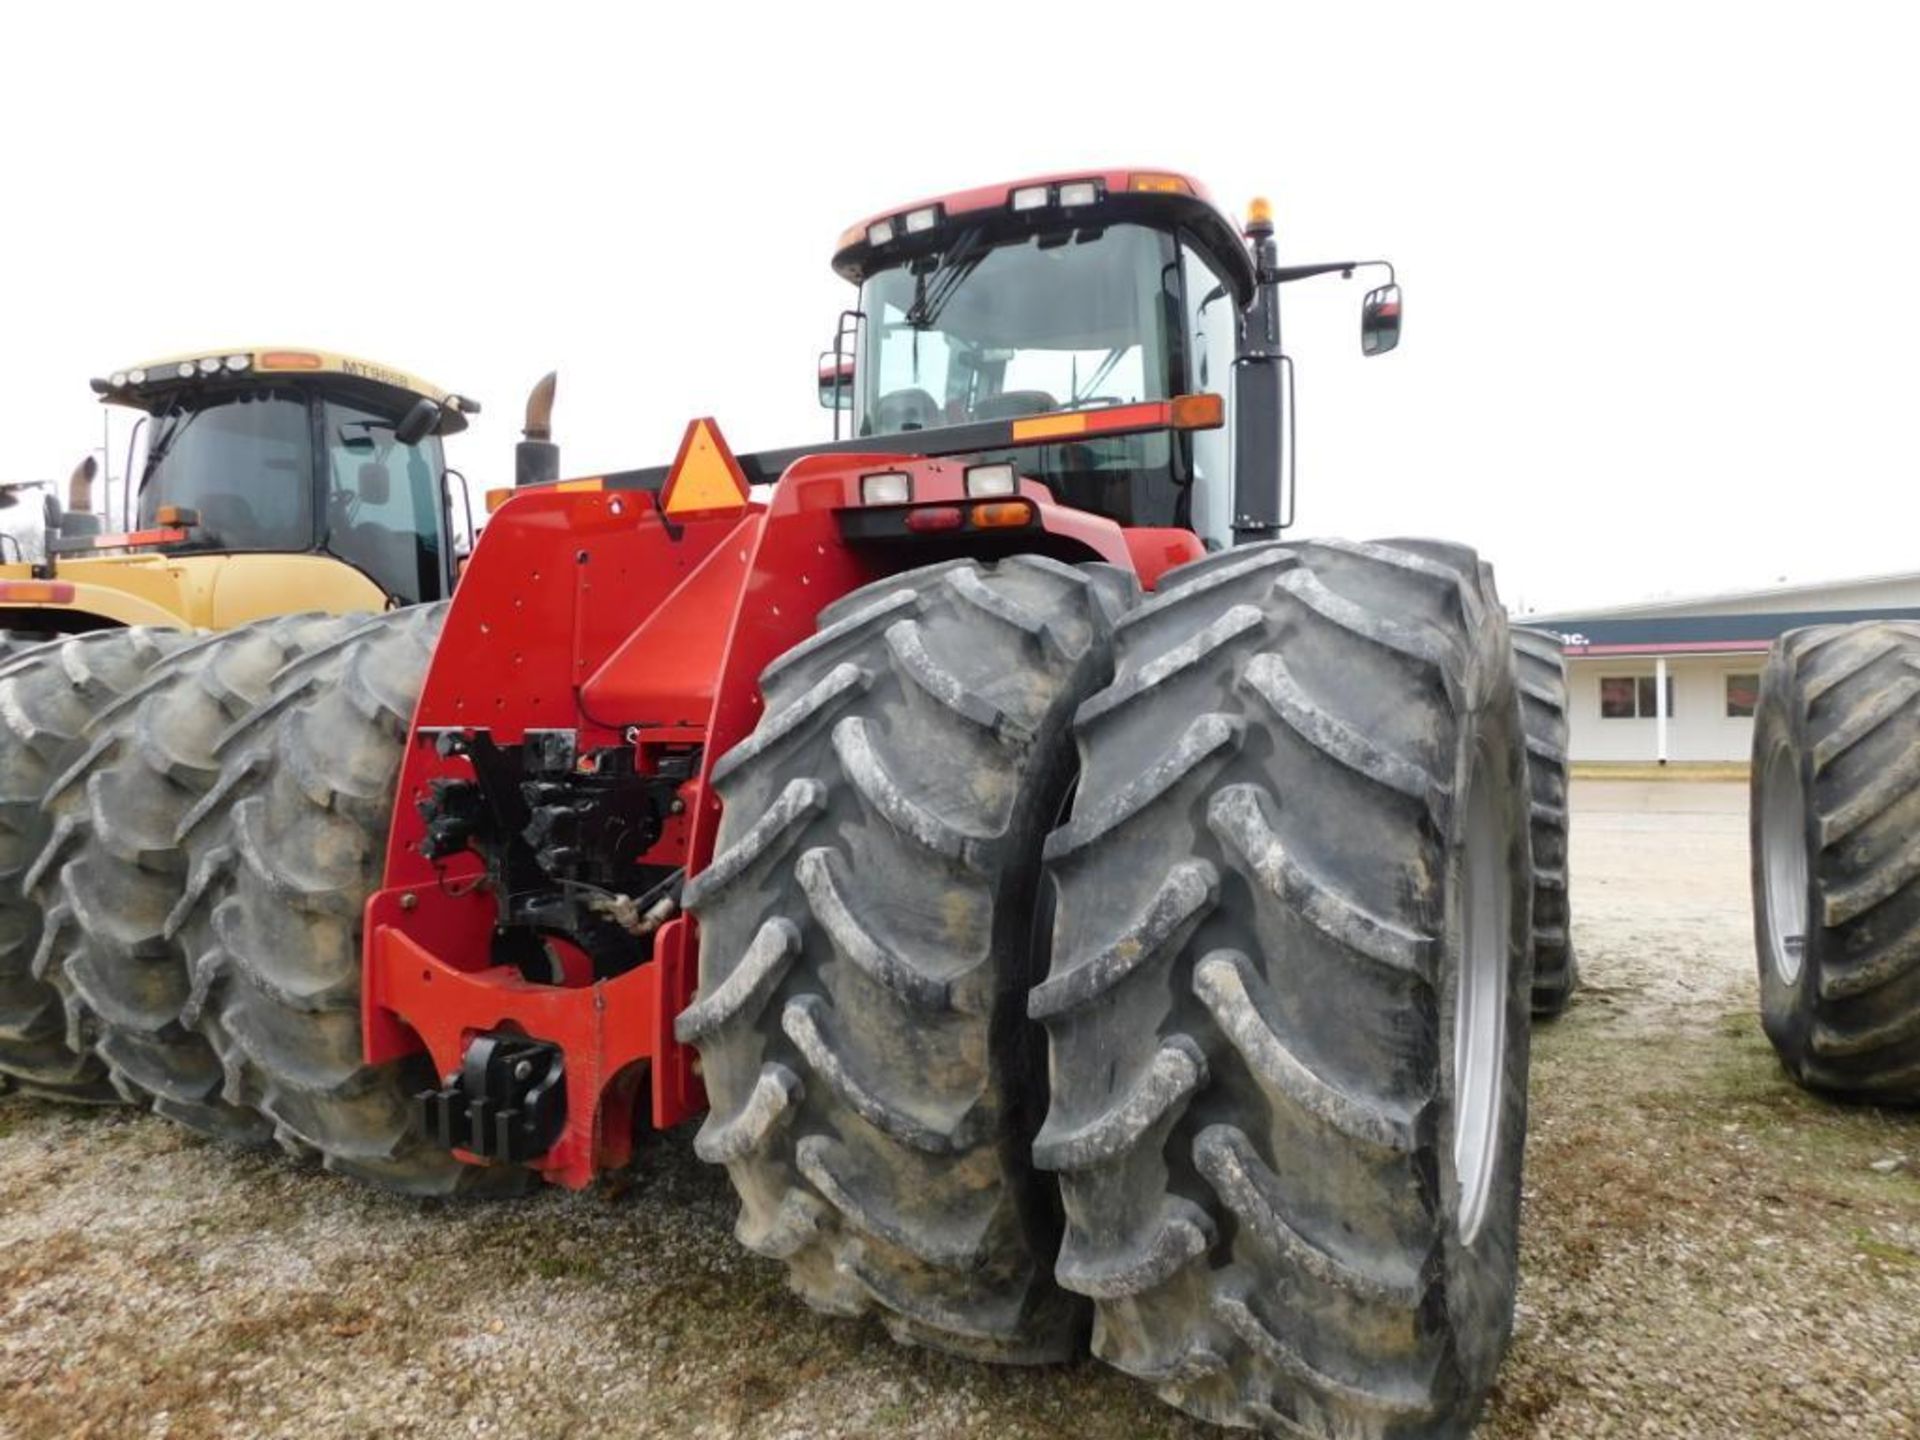 2013 Case-IH Steiger Tractor Model 500S, S/N ZDF139007, 4WD, 6-Cyl. 12.9L 500 HP Engine, 16-Speed F/ - Image 4 of 5